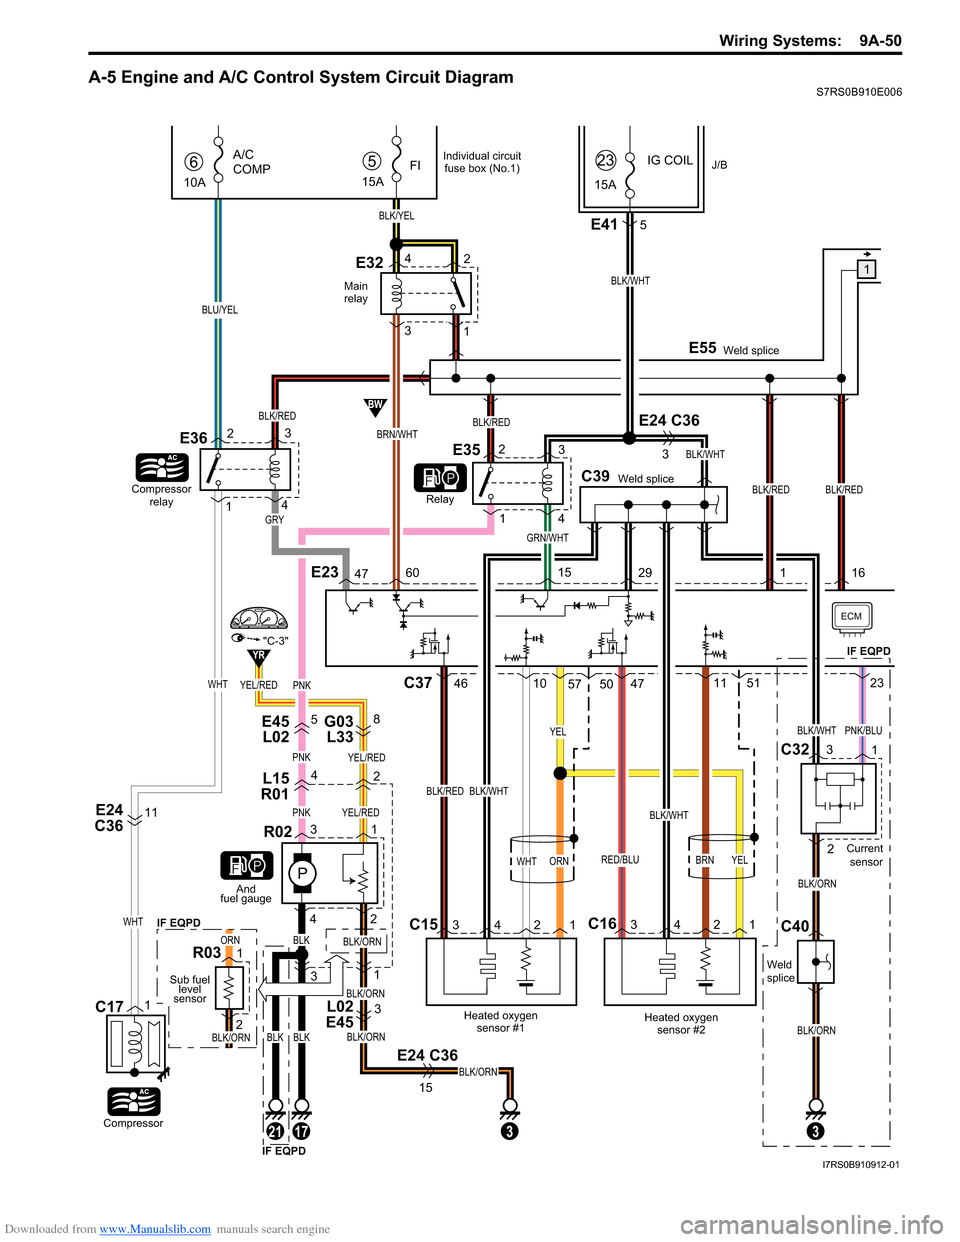 SUZUKI SWIFT 2006 2.G Service User Guide Downloaded from www.Manualslib.com manuals search engine Wiring Systems:  9A-50
A-5 Engine and A/C Control System Circuit DiagramS7RS0B910E006
YEL/RED
E45L02 G03 
L33
L02 
E4558
L15
R0142
PNKYEL/RED
P